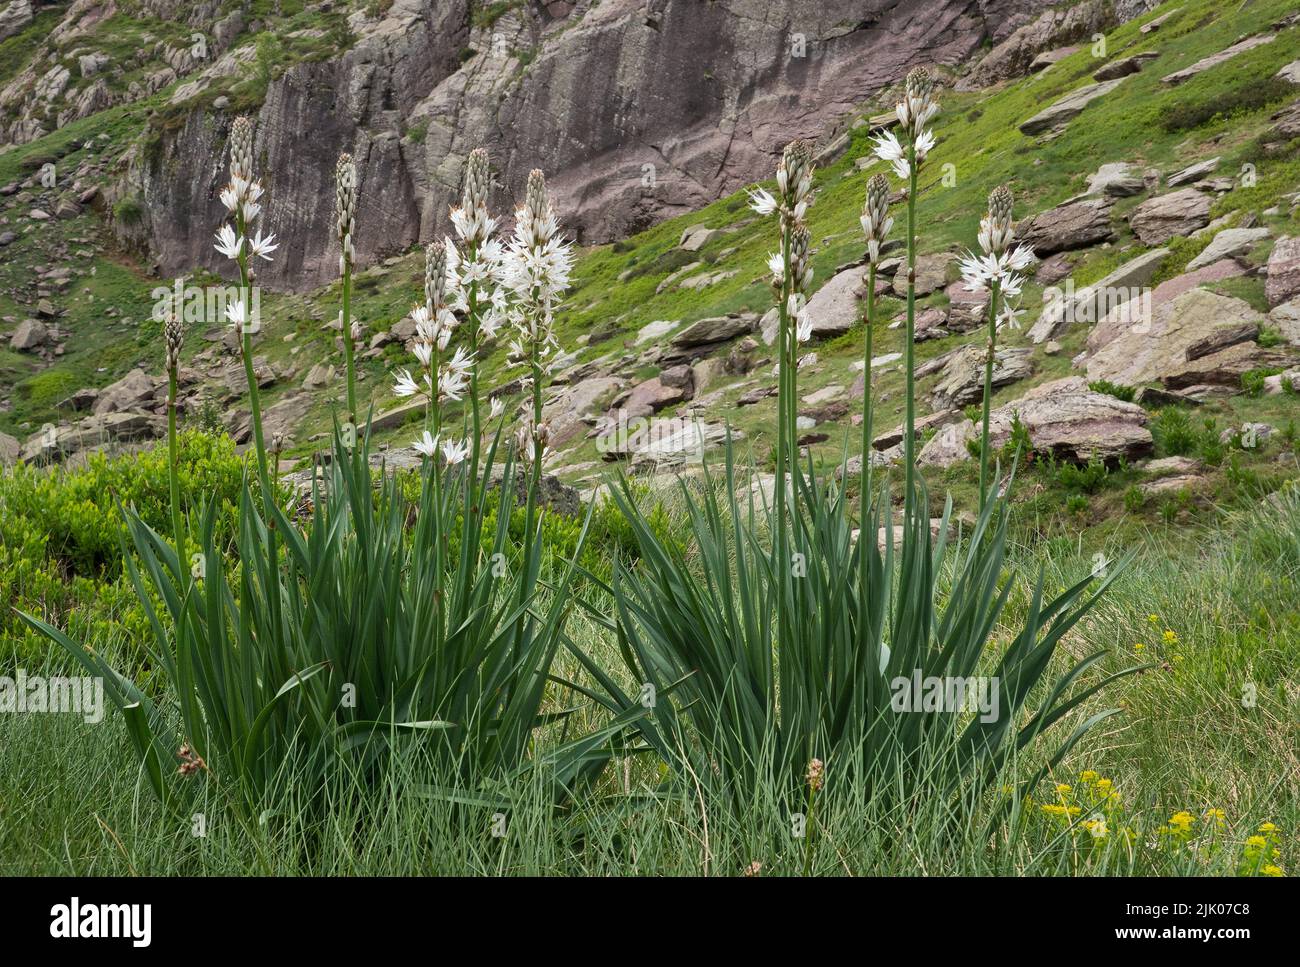 White asphodels, plants with long stalks and white flowers, in alpine landscape Stock Photo